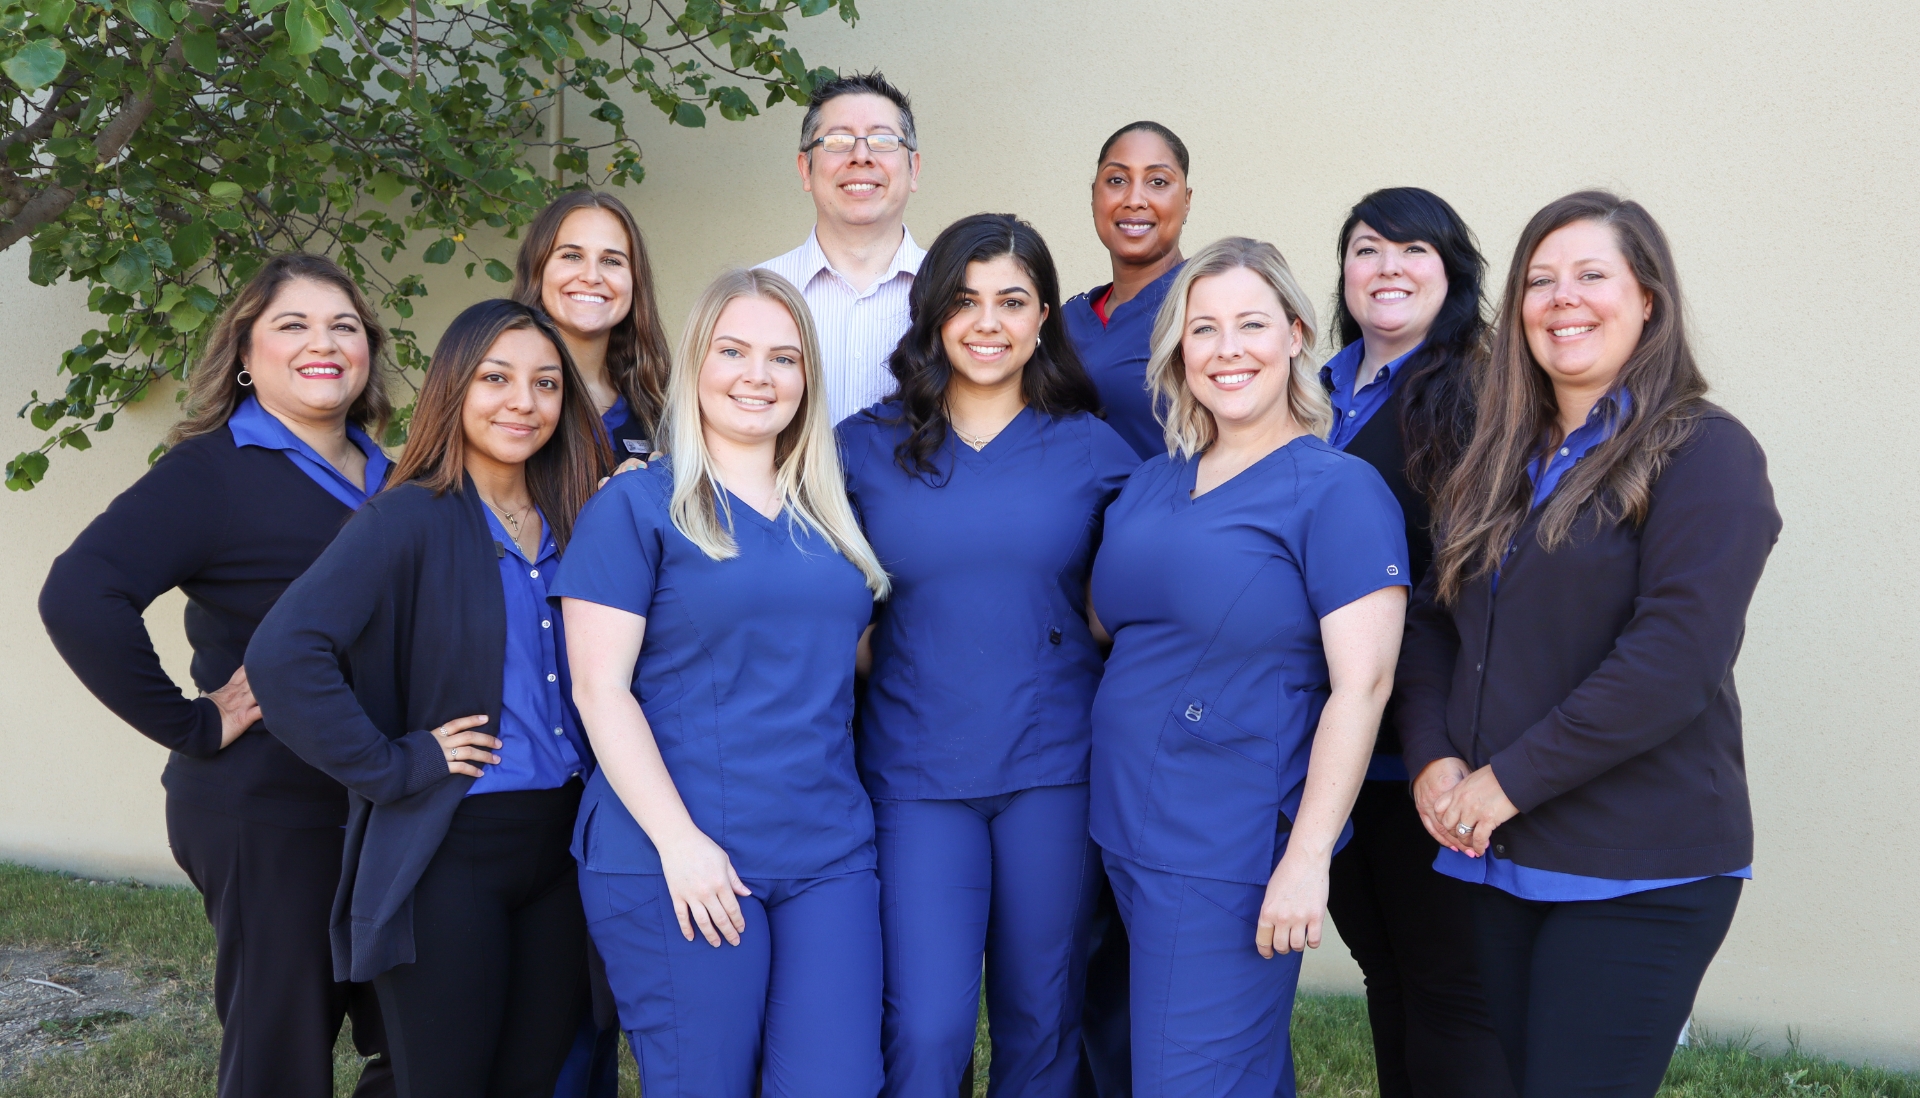 The trusted Copperas Cove Texas dental team